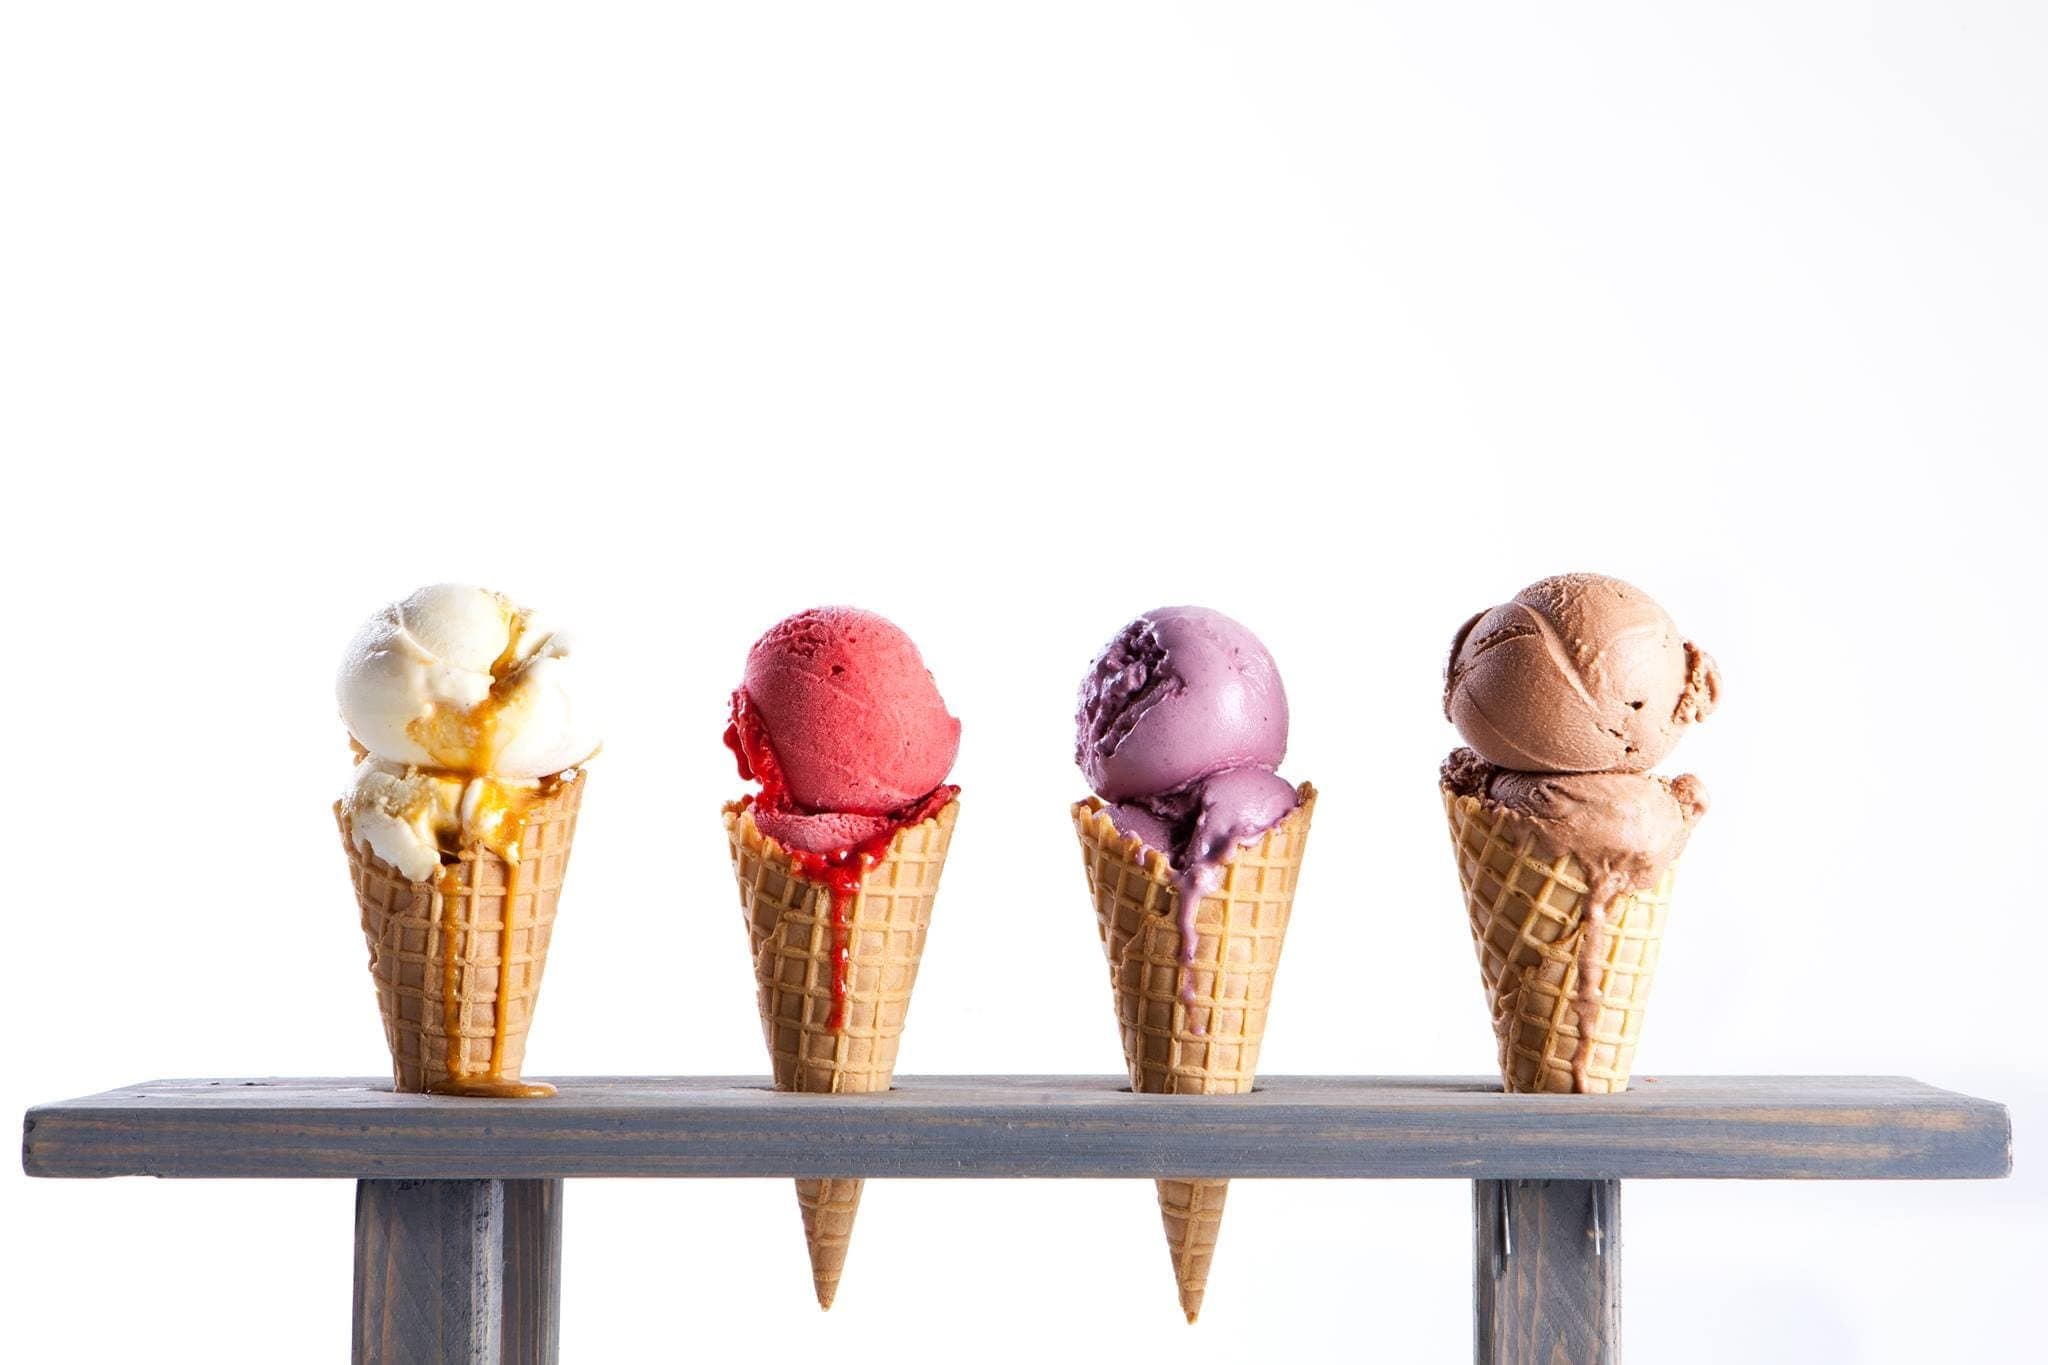 Scoop Up Some Fun at These 20 Indiana Ice Cream Shops